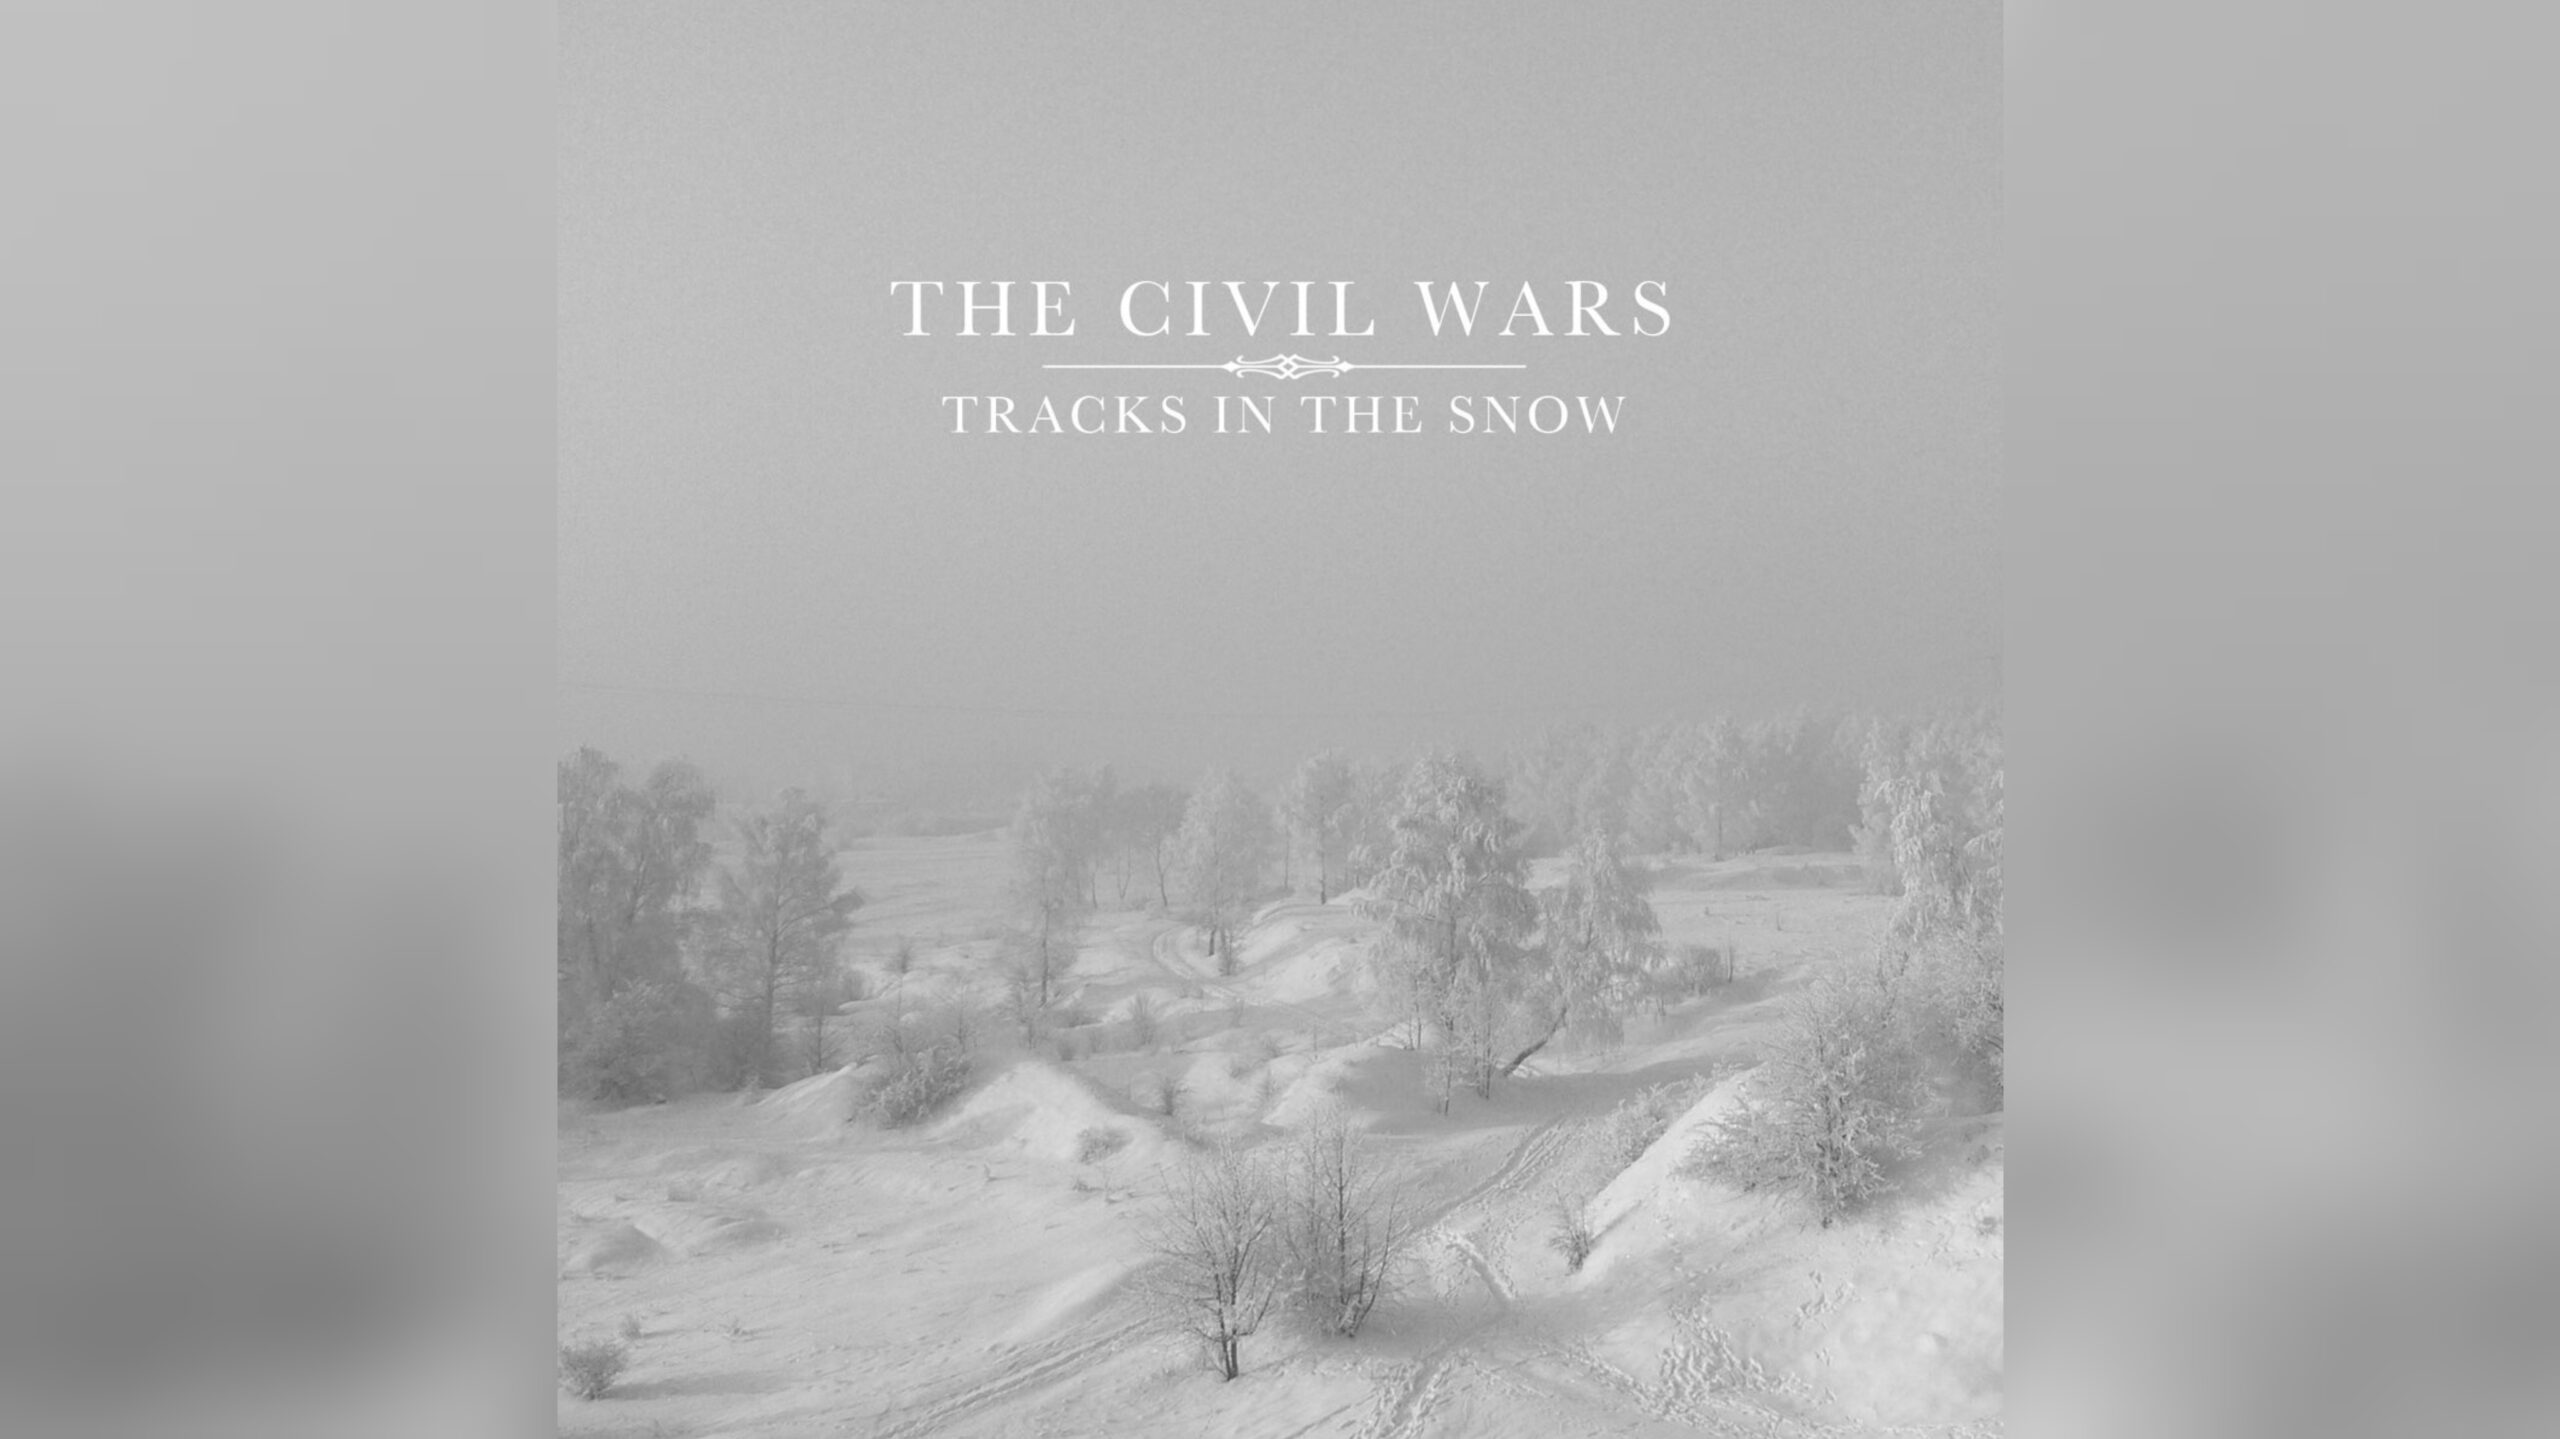 The cover for the EP "Tracks in the Snow" by The Civil Wars